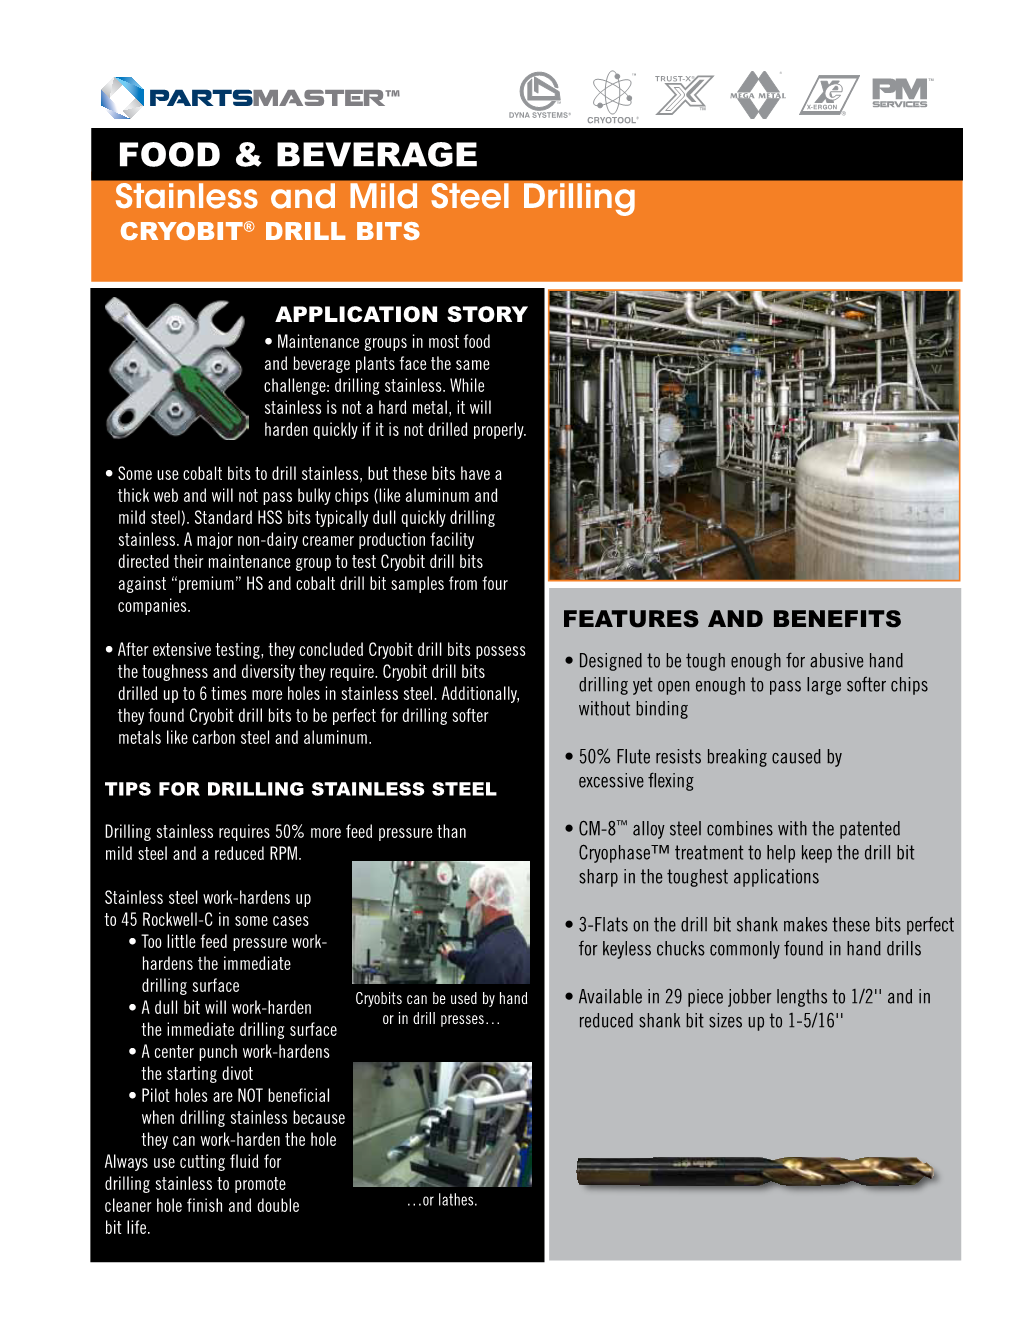 Stainless and Mild Steel Drilling FOOD & BEVERAGE